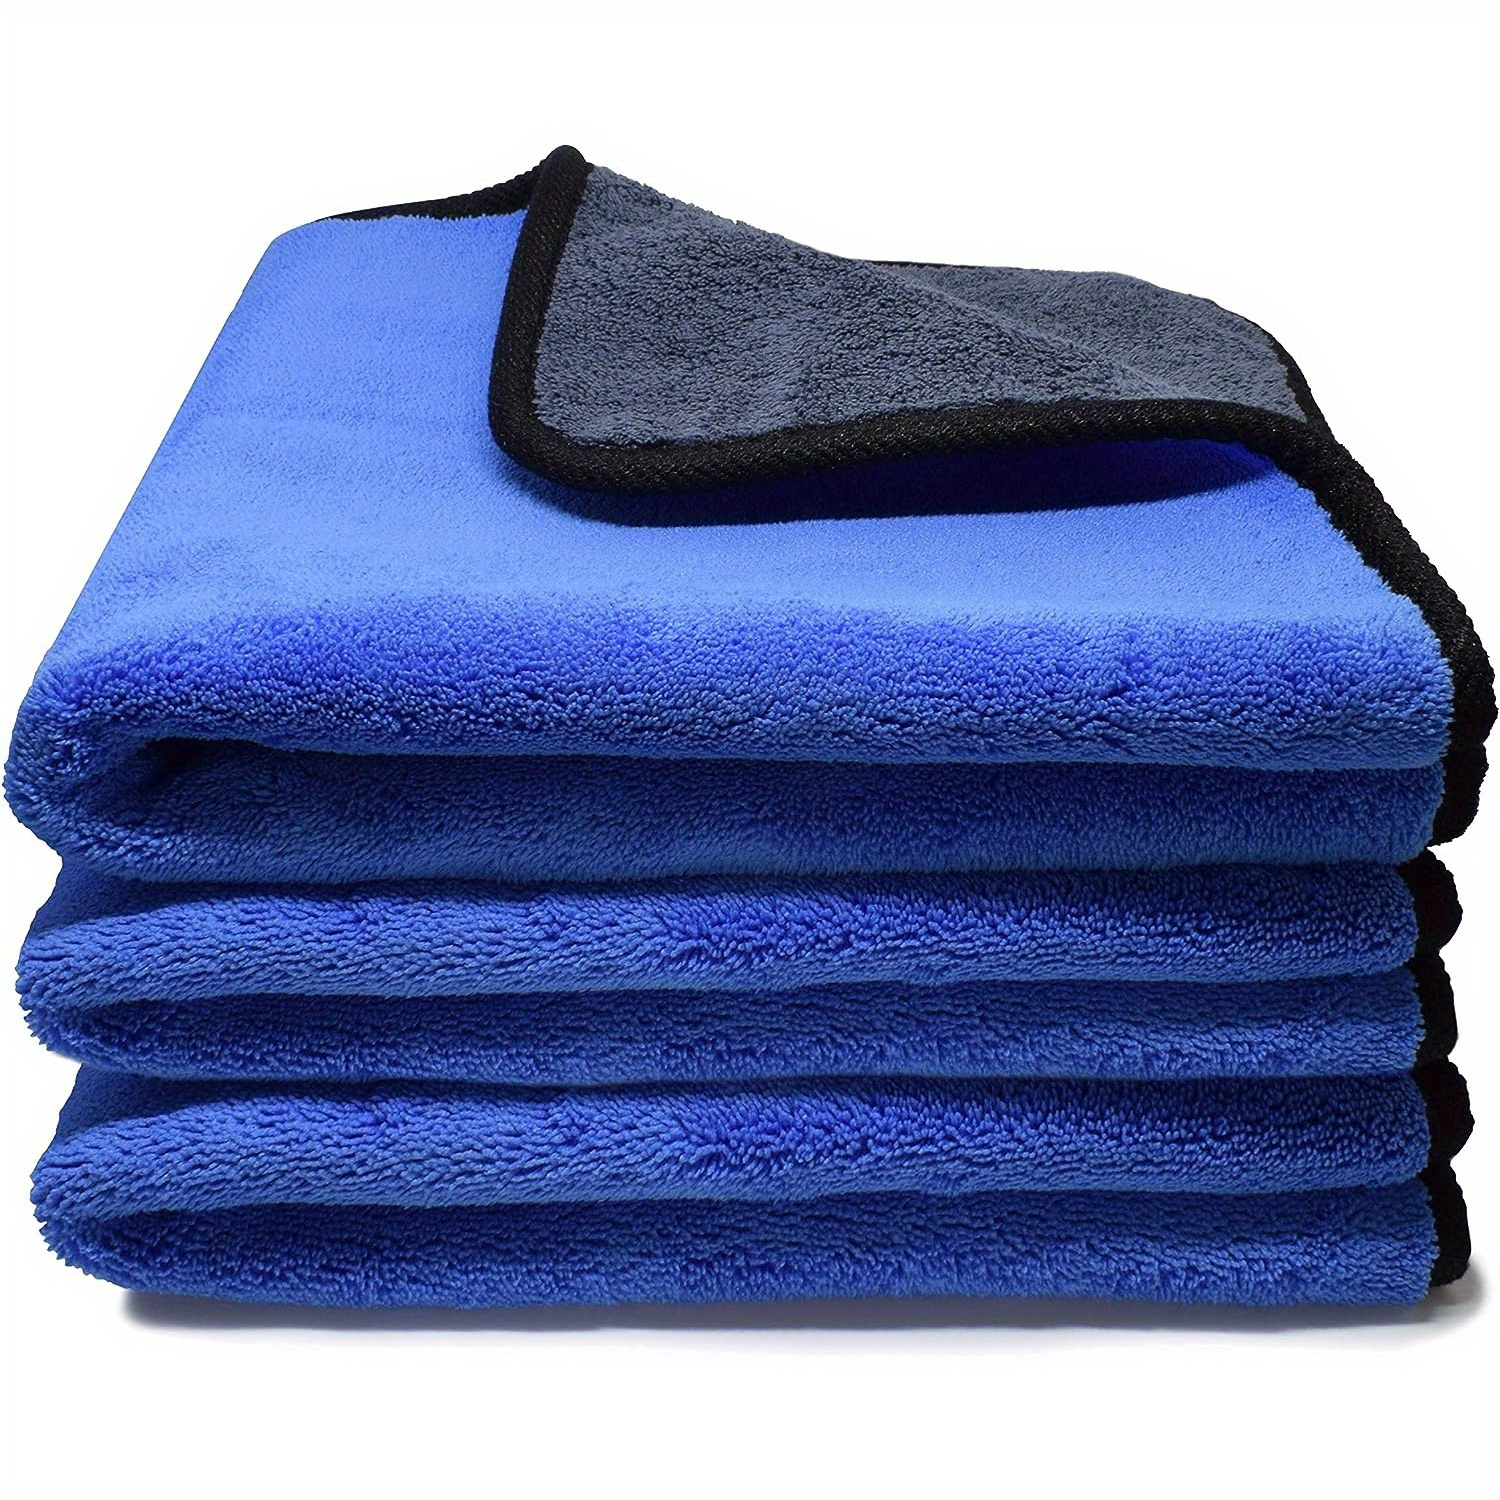 

Microfiber Towels For Cars 3 Pieces 500 Gsm Polishing Cleaning Home, Car And Motorbike - 12 X 12 Inches (30x30cm)